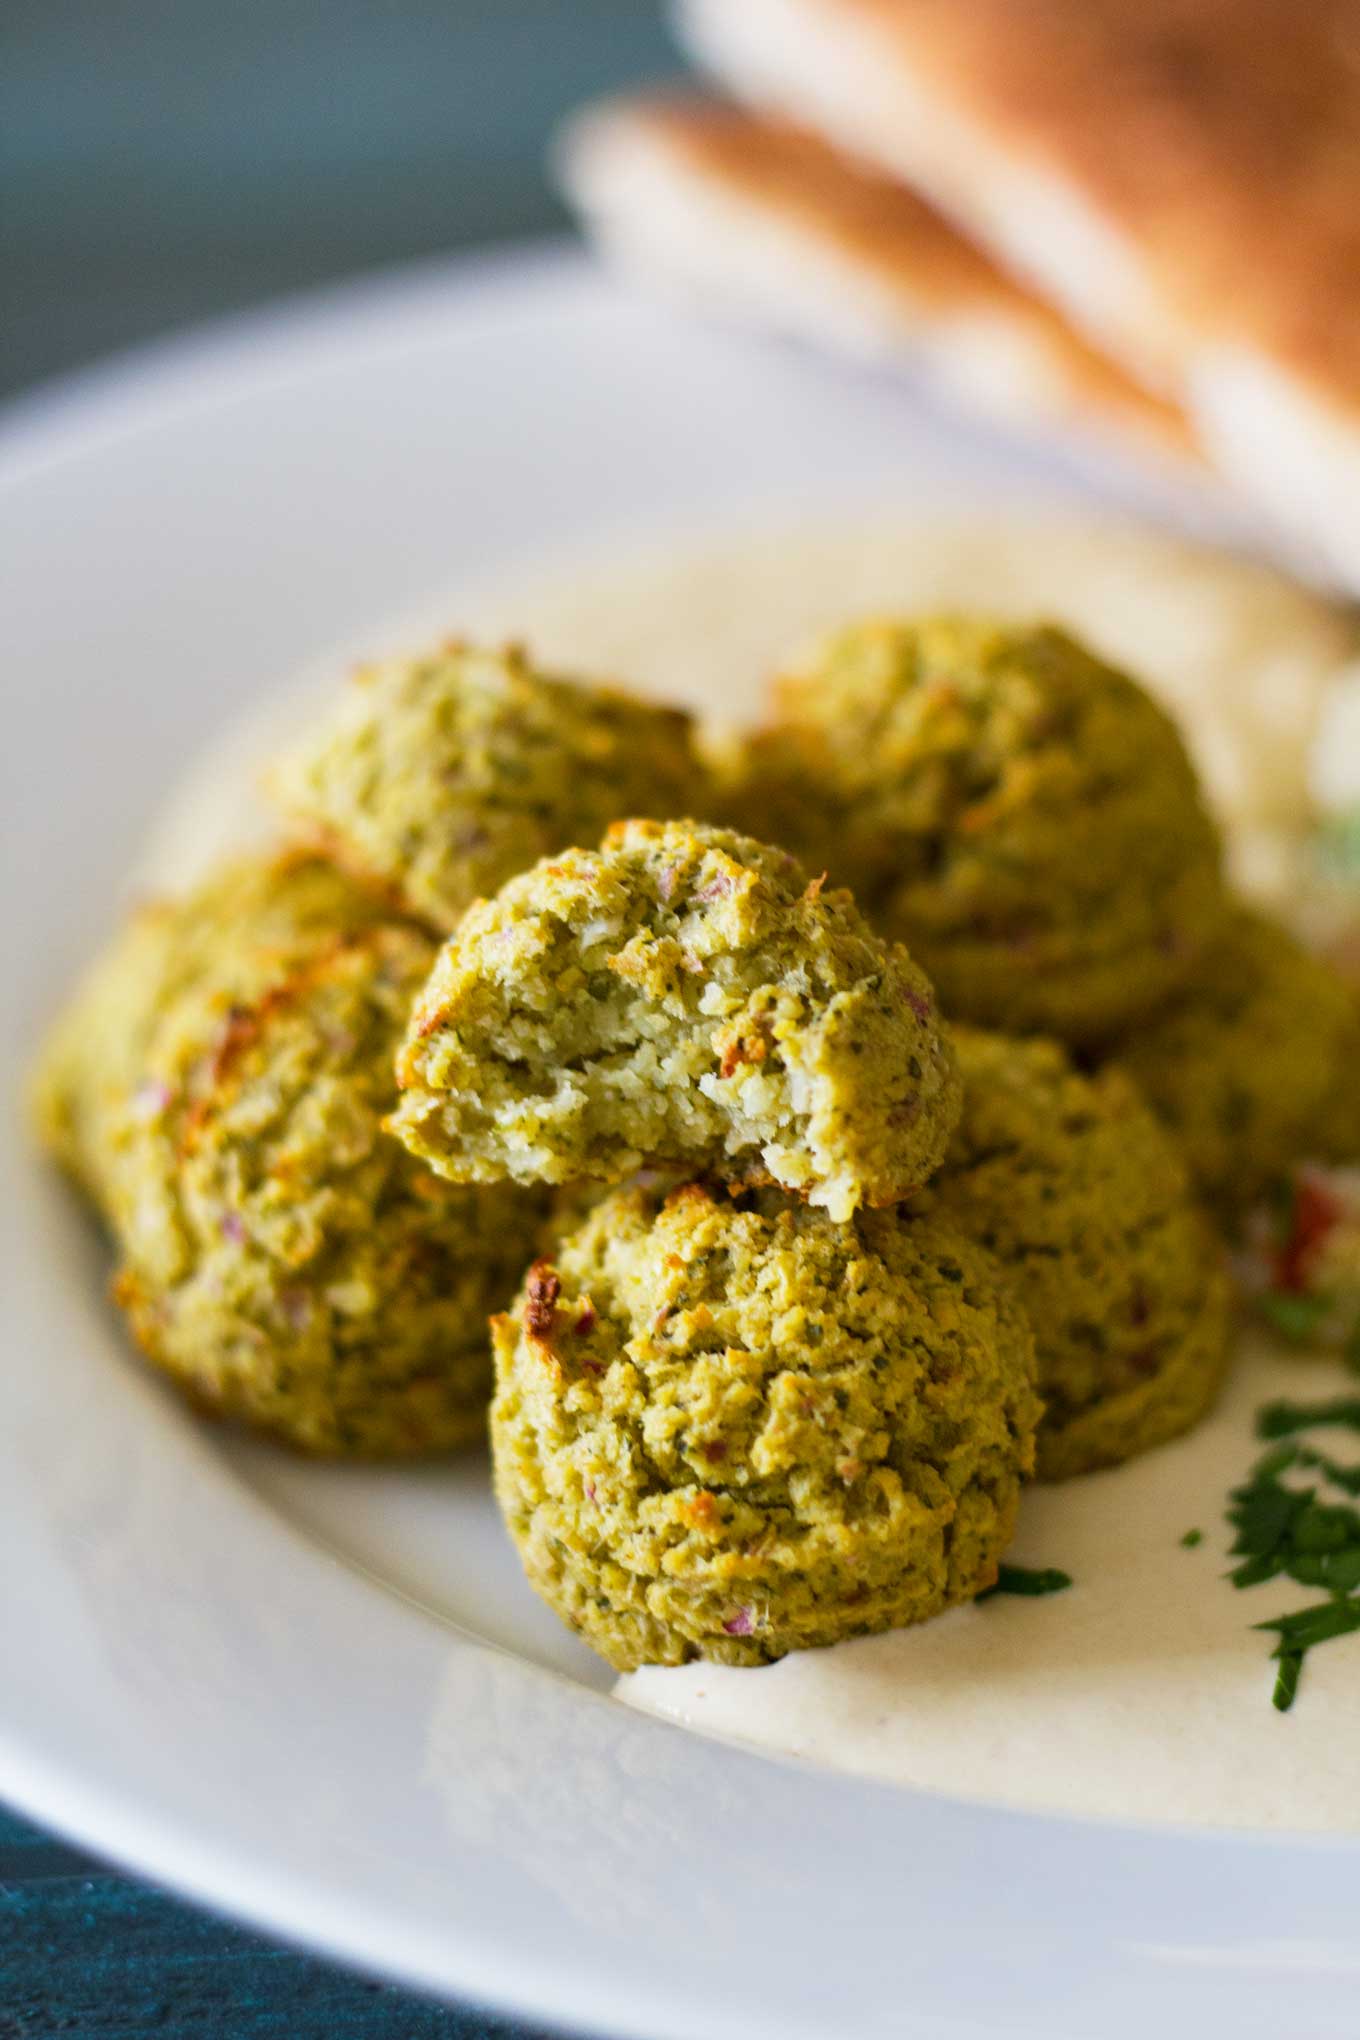 Easy Oven Baked Falafel Pass The Plants